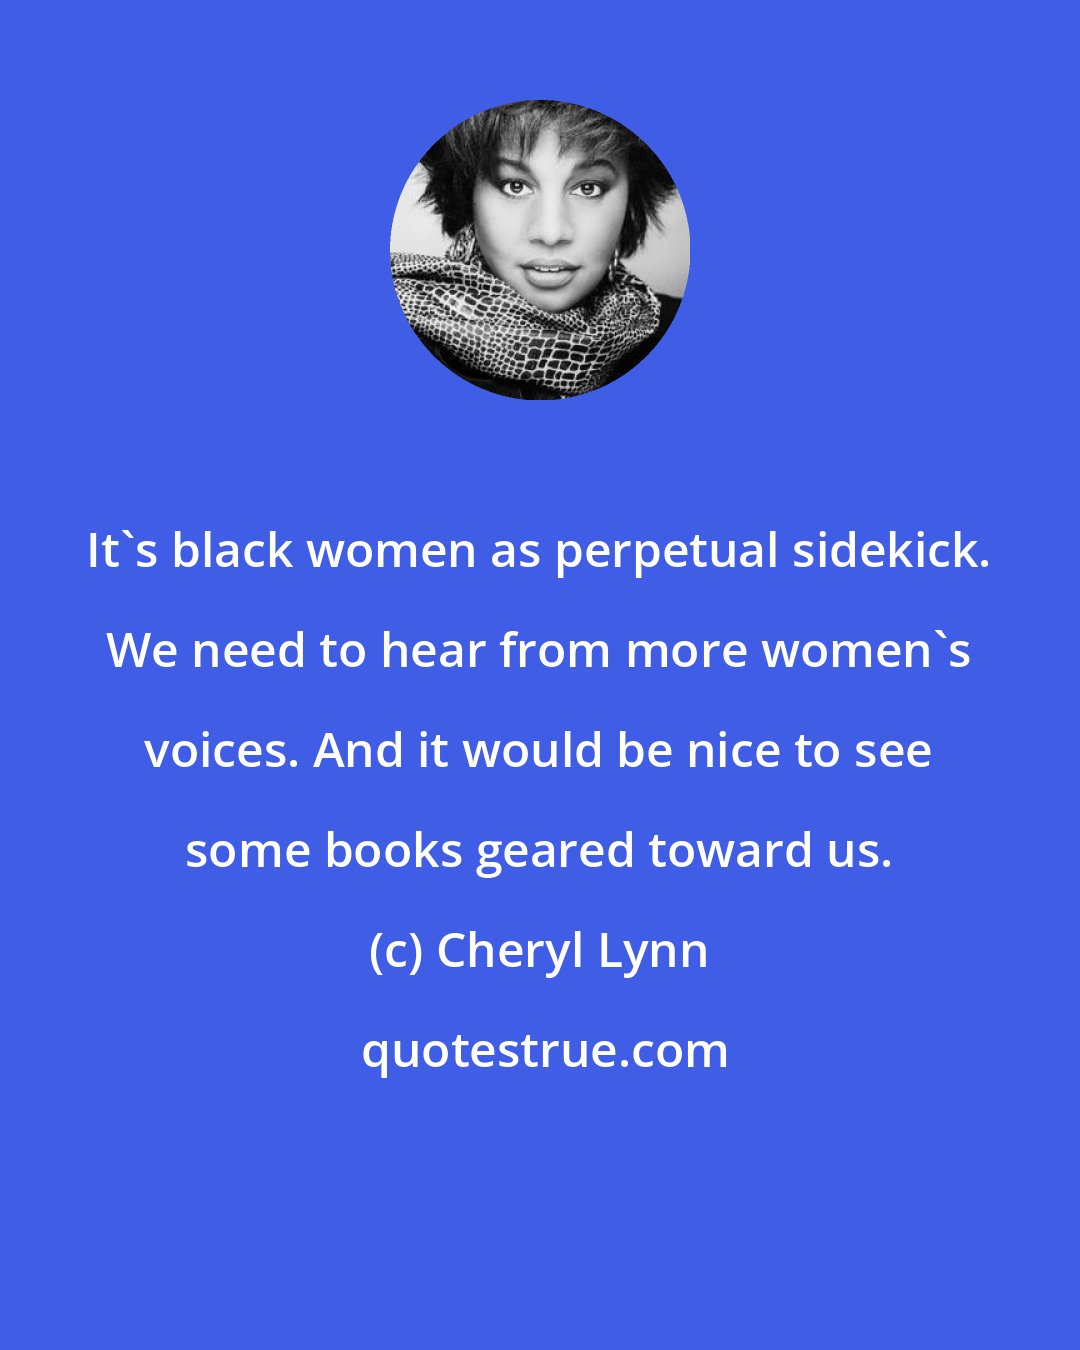 Cheryl Lynn: It's black women as perpetual sidekick. We need to hear from more women's voices. And it would be nice to see some books geared toward us.